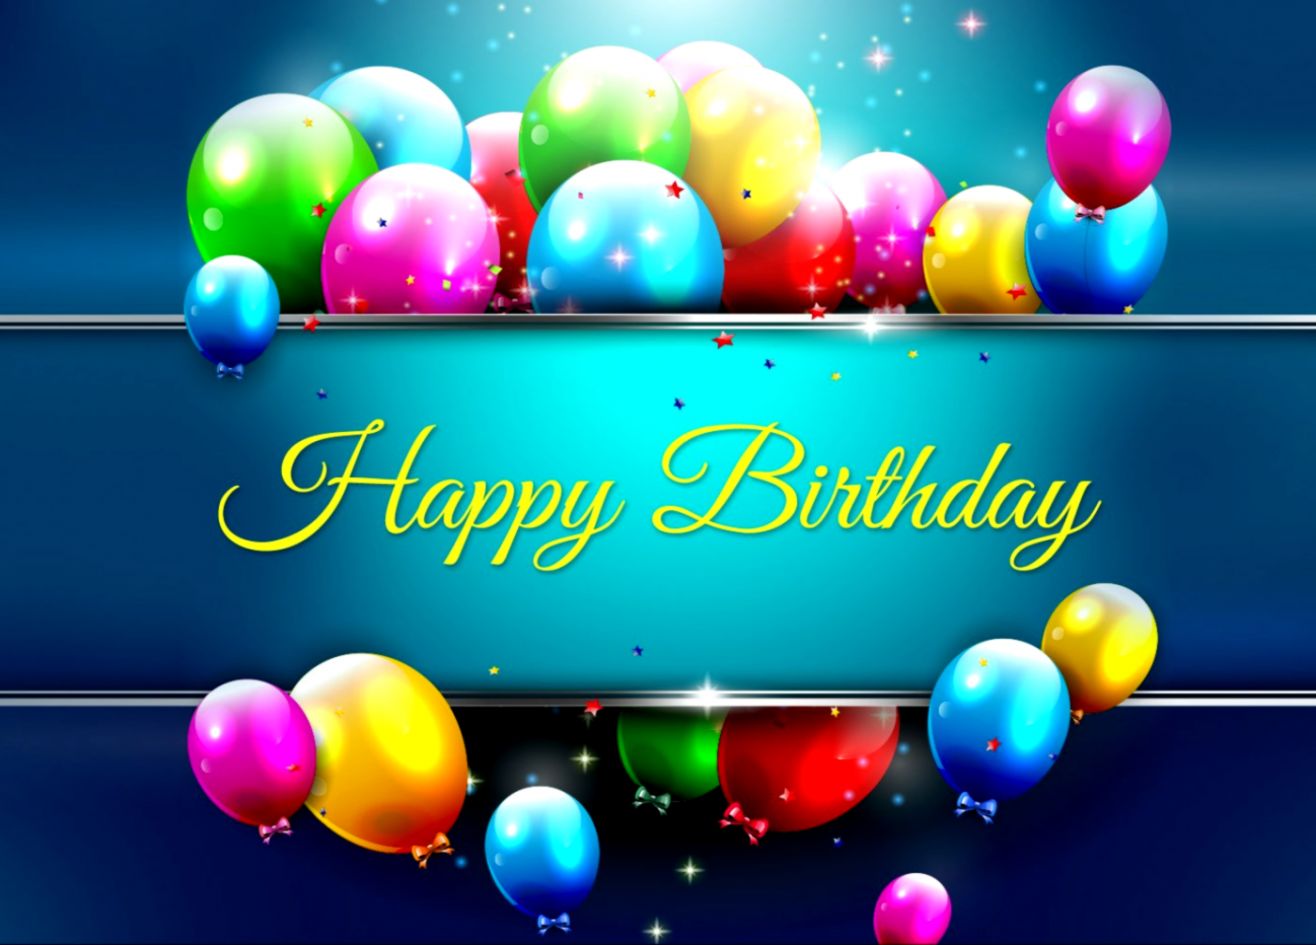 Happy Birthday Images Gif Wallpaper & Photos For Whatsapp - 1080p Happy  Birthday Image Hd - 1316x945 Wallpaper 